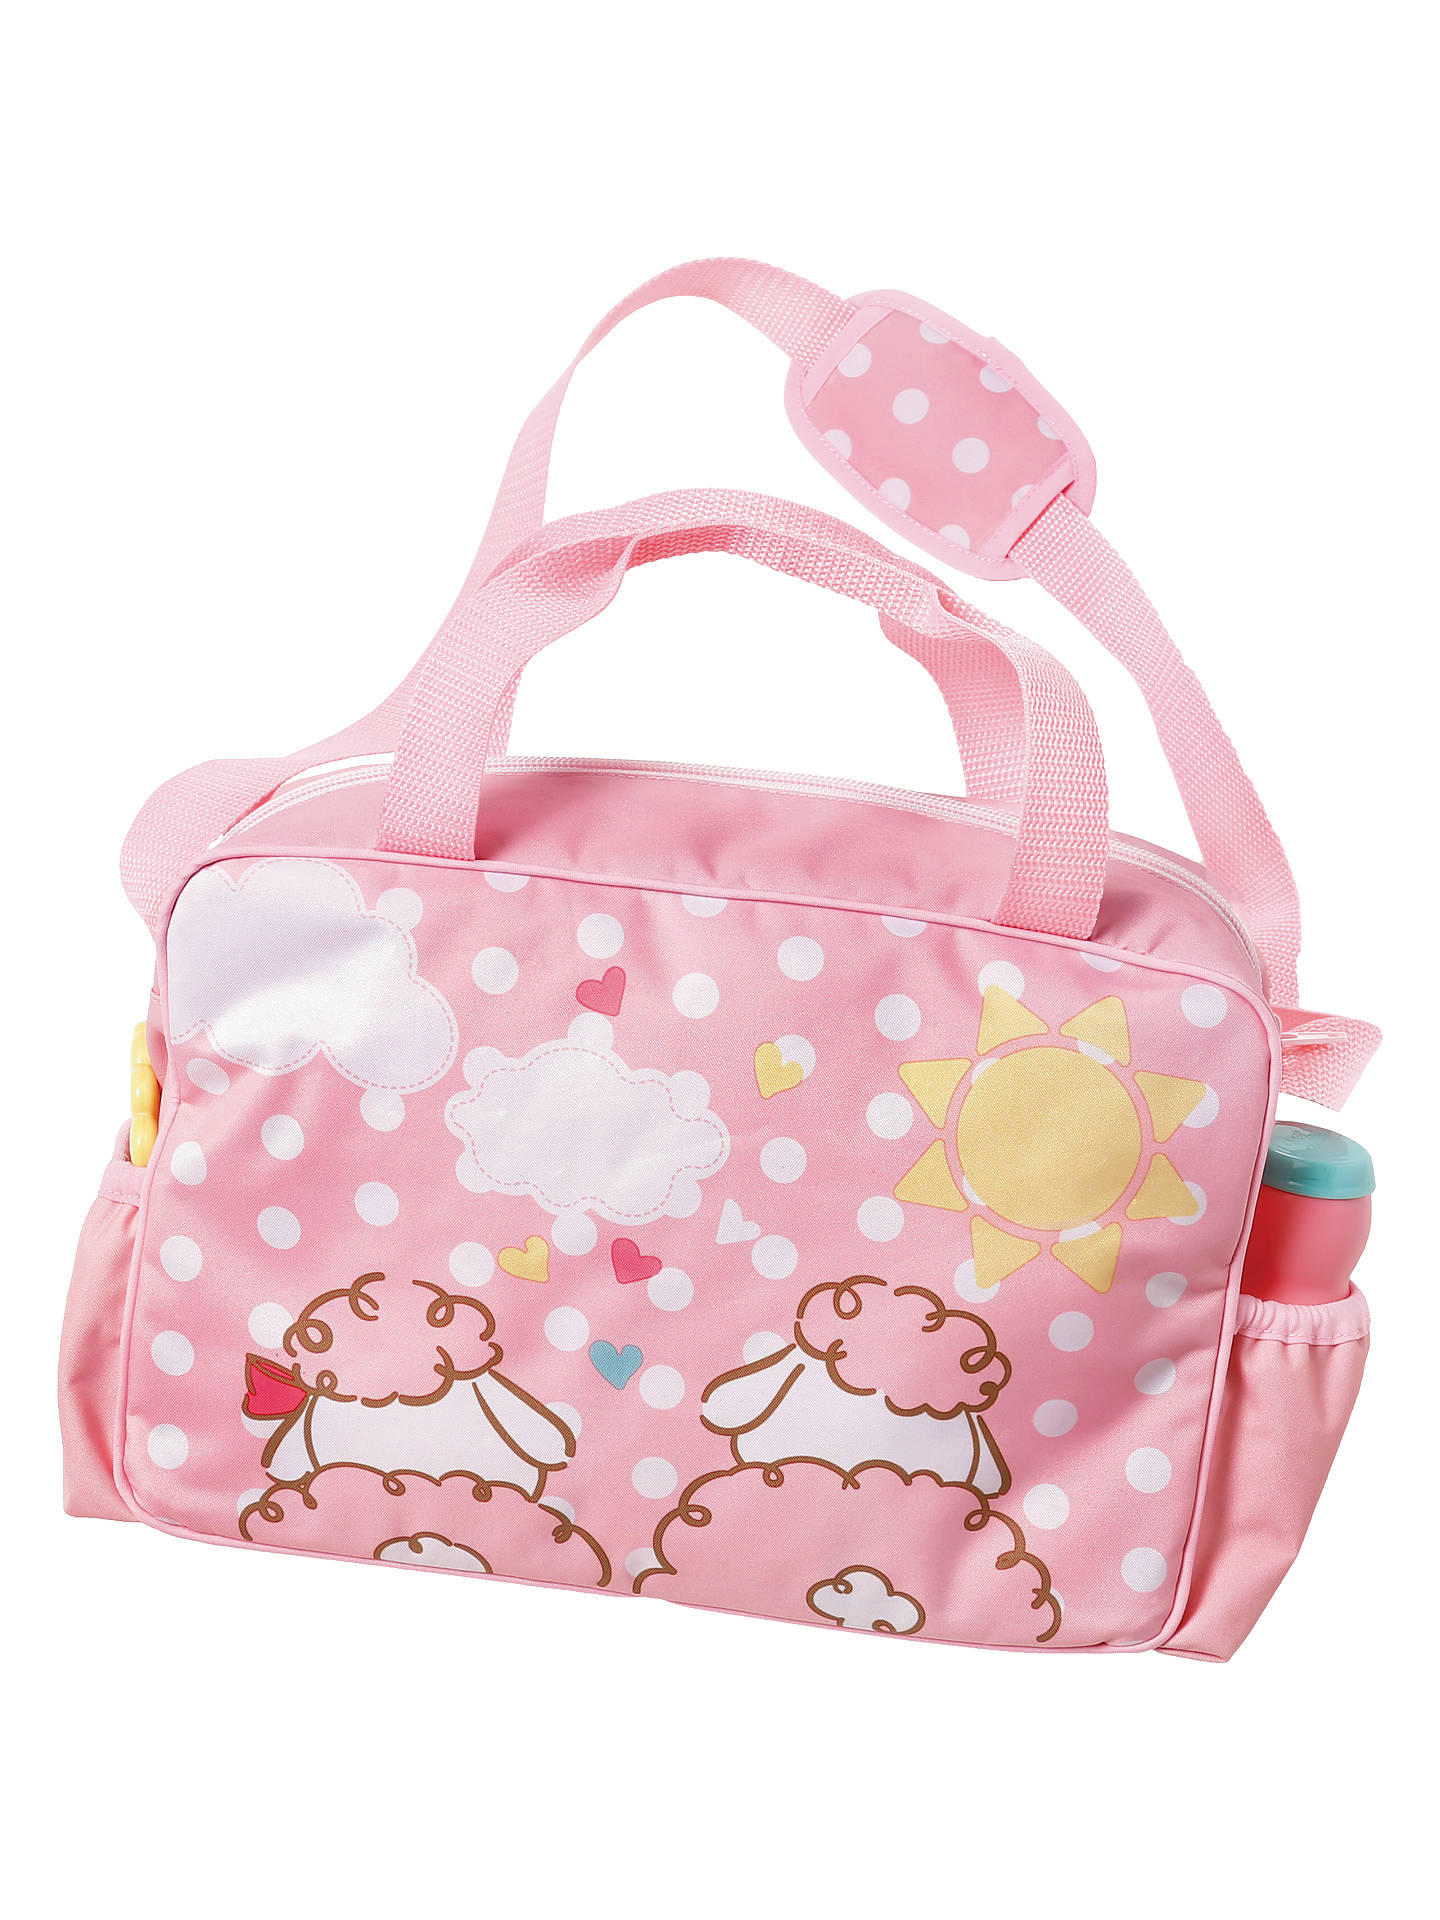 Zapf Baby Annabell Changing Bag at John Lewis & Partners